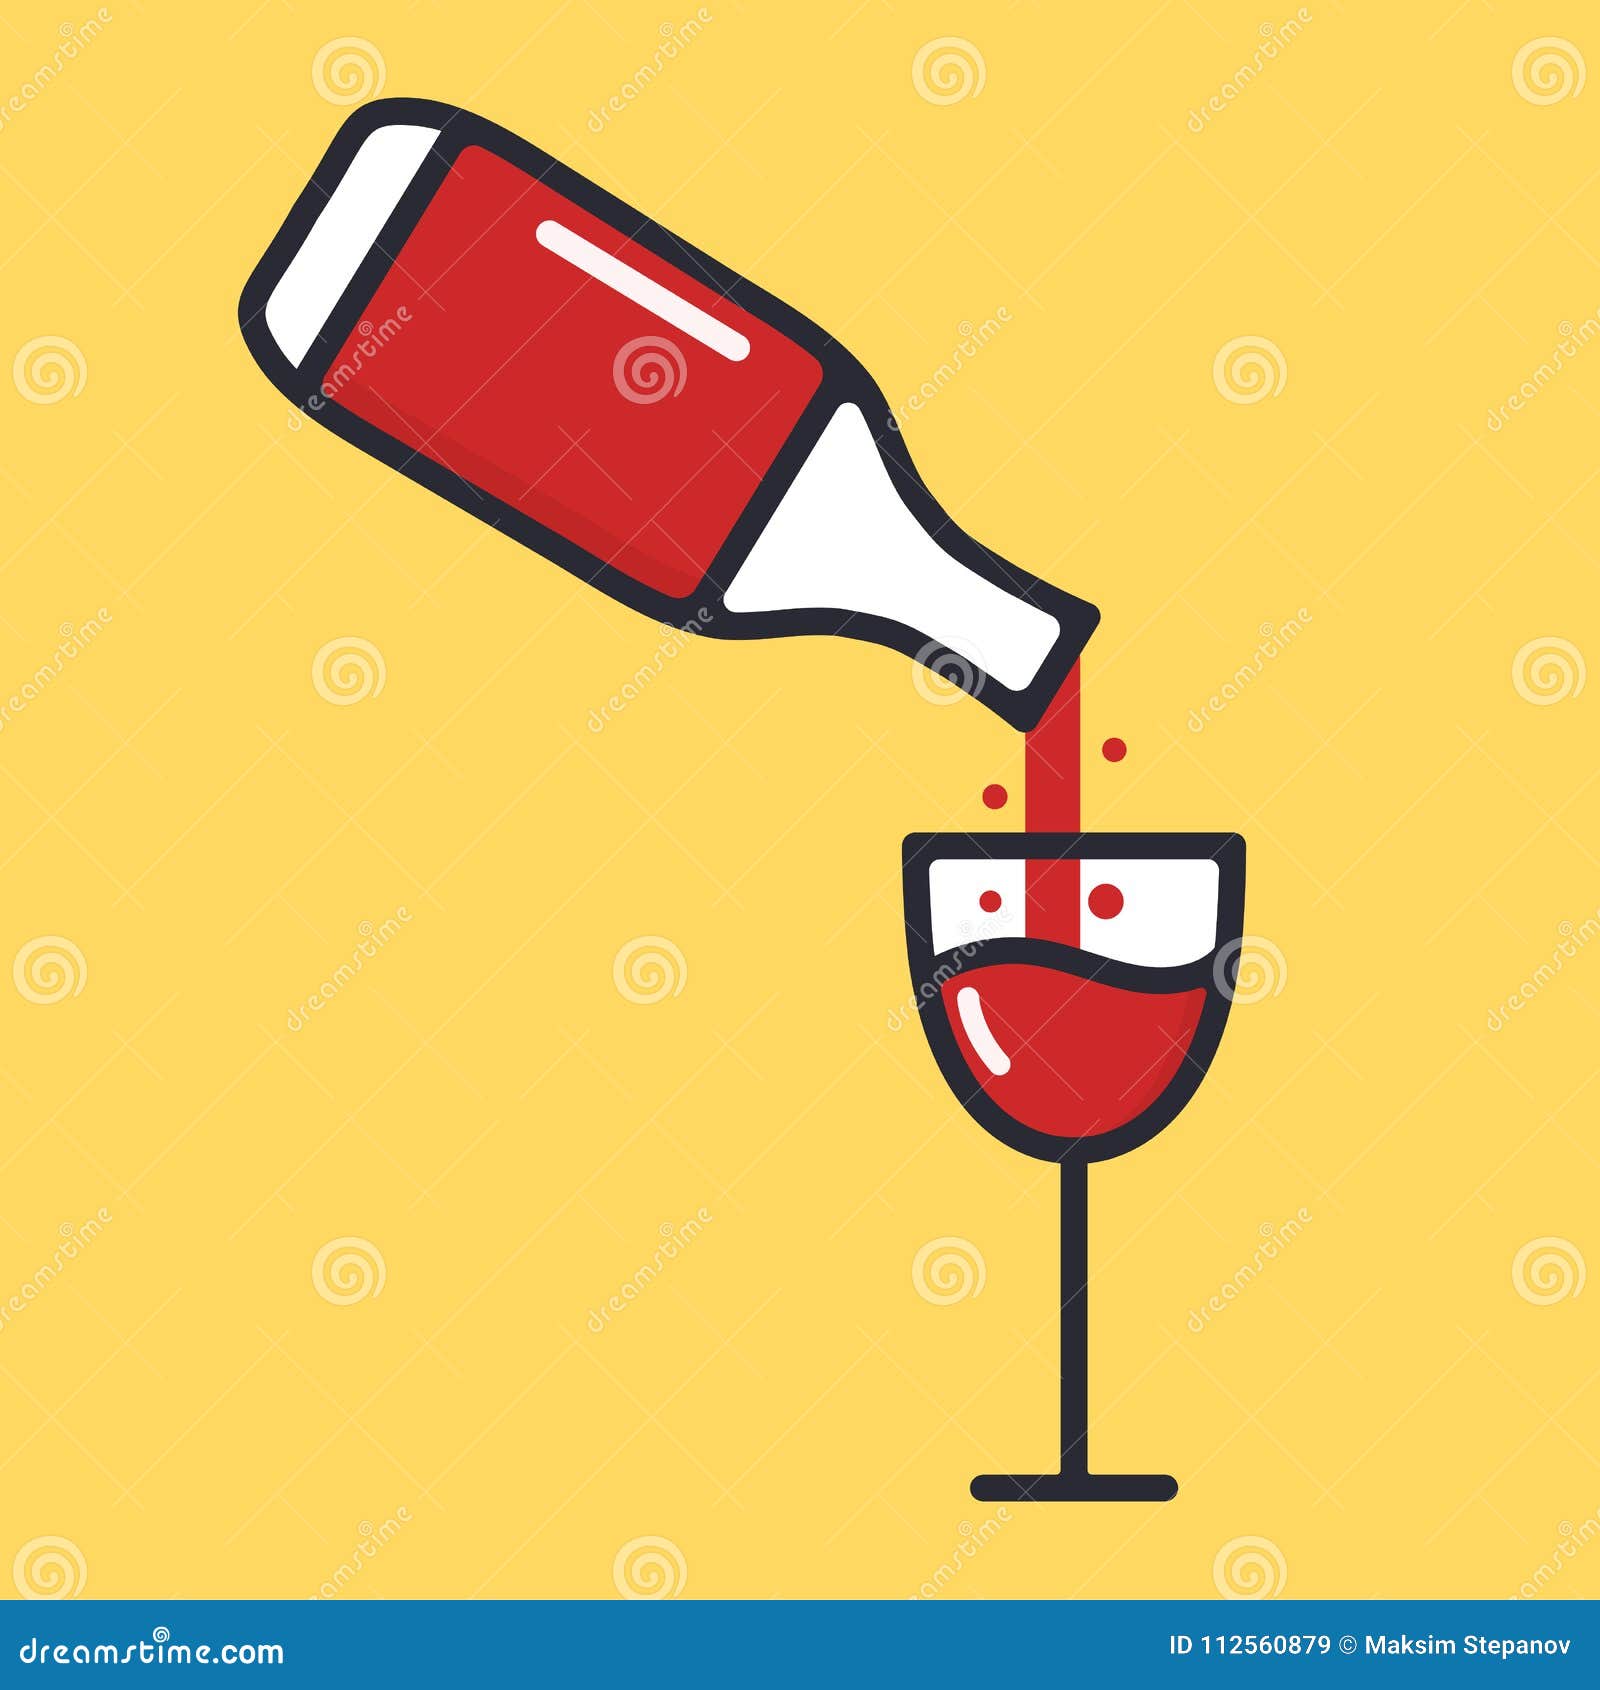 Bottle and Wineglass with Red Wine. Pour into a Glass. Alcohol Drink.  Cartoon Alcohol Icon Stock Vector - Illustration of saloon, pour: 112560879